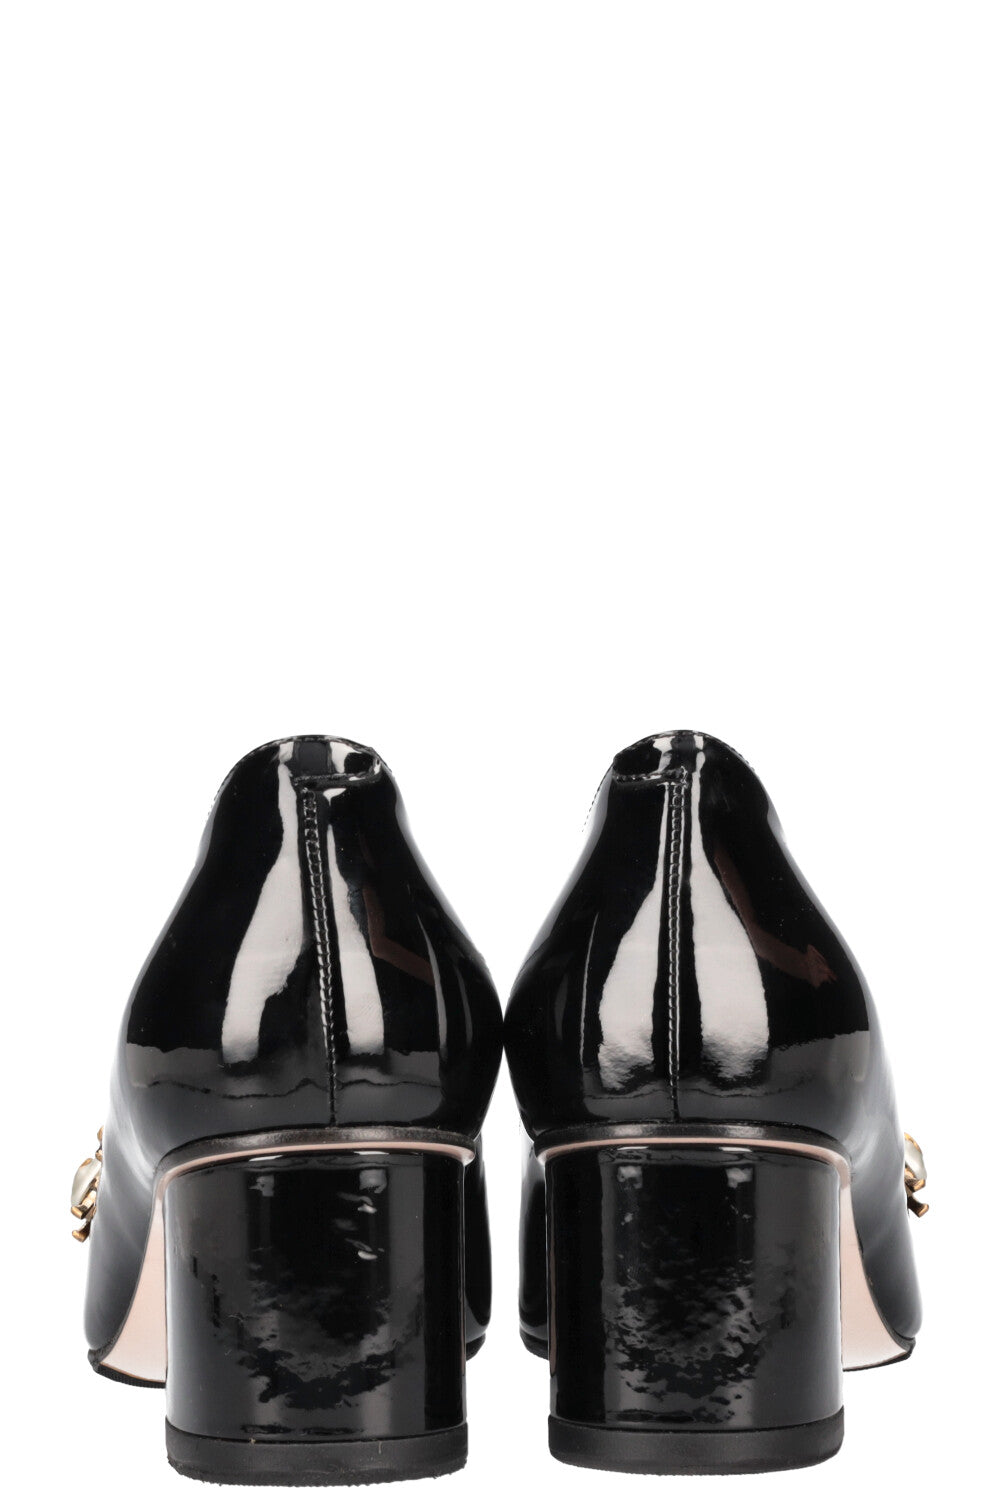 GUCCI Bee Mary Janes Heels Patent Black